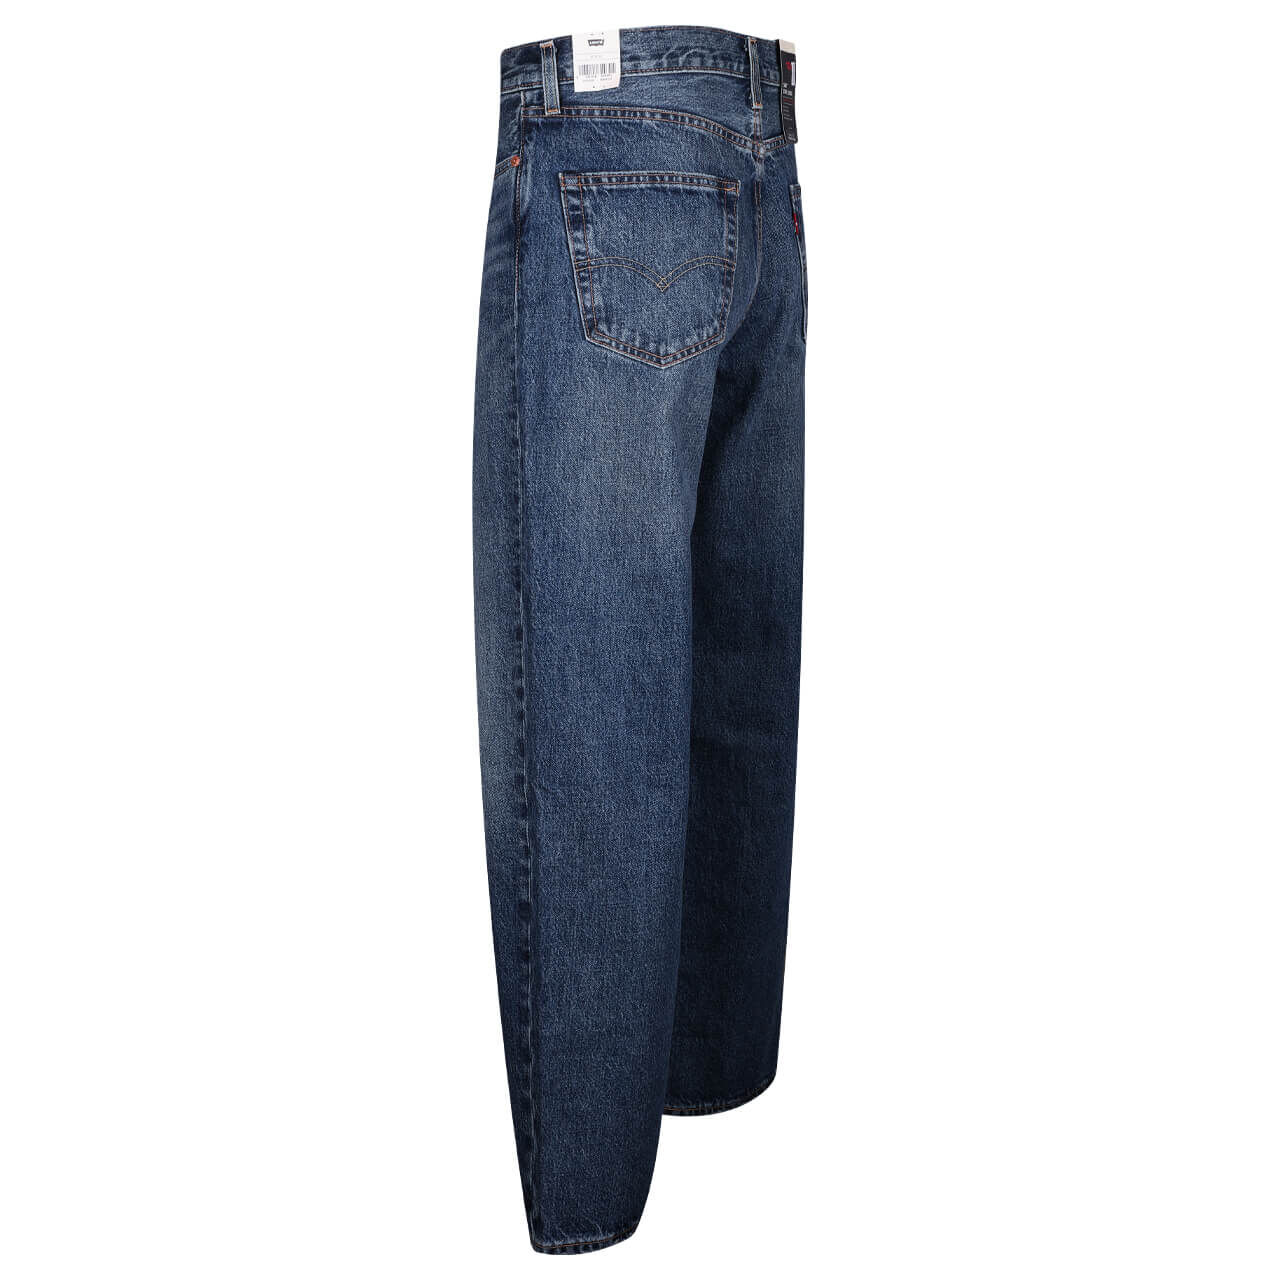 Levi's® 568 Herren Jeans classic blue washed